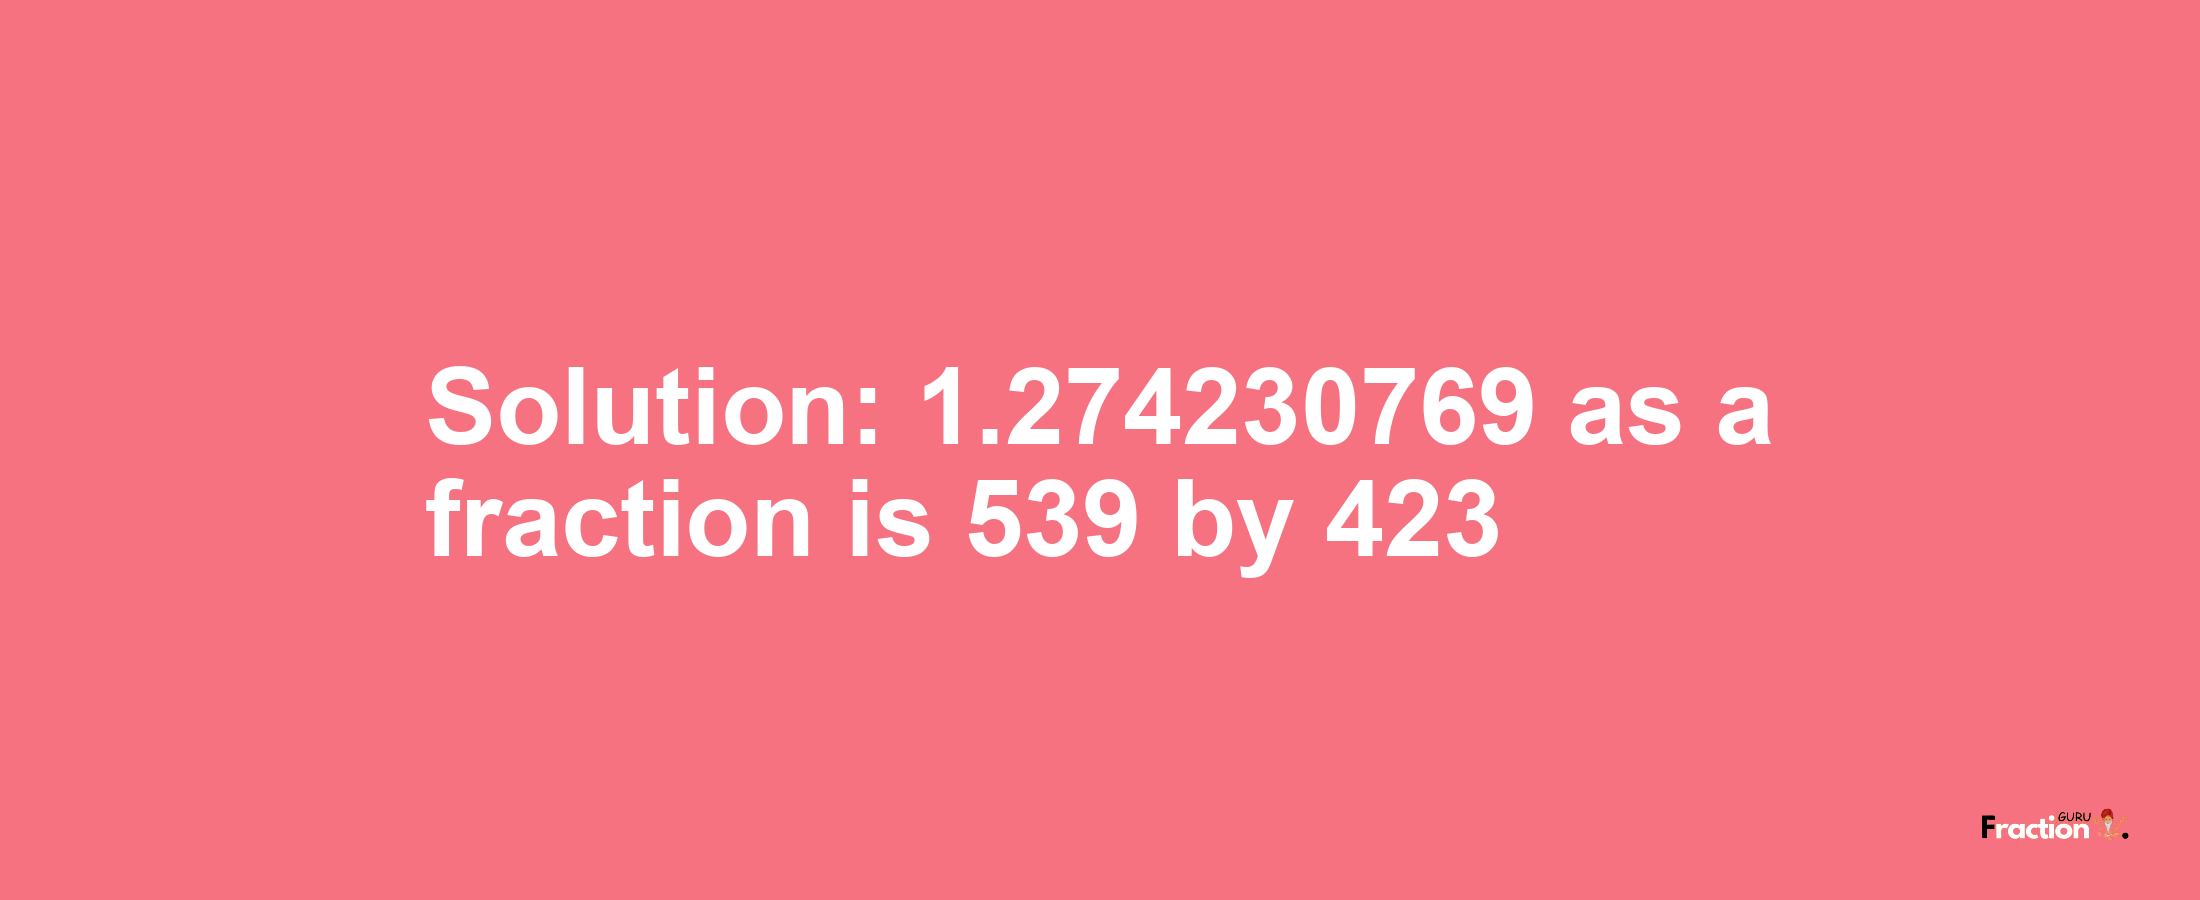 Solution:1.274230769 as a fraction is 539/423